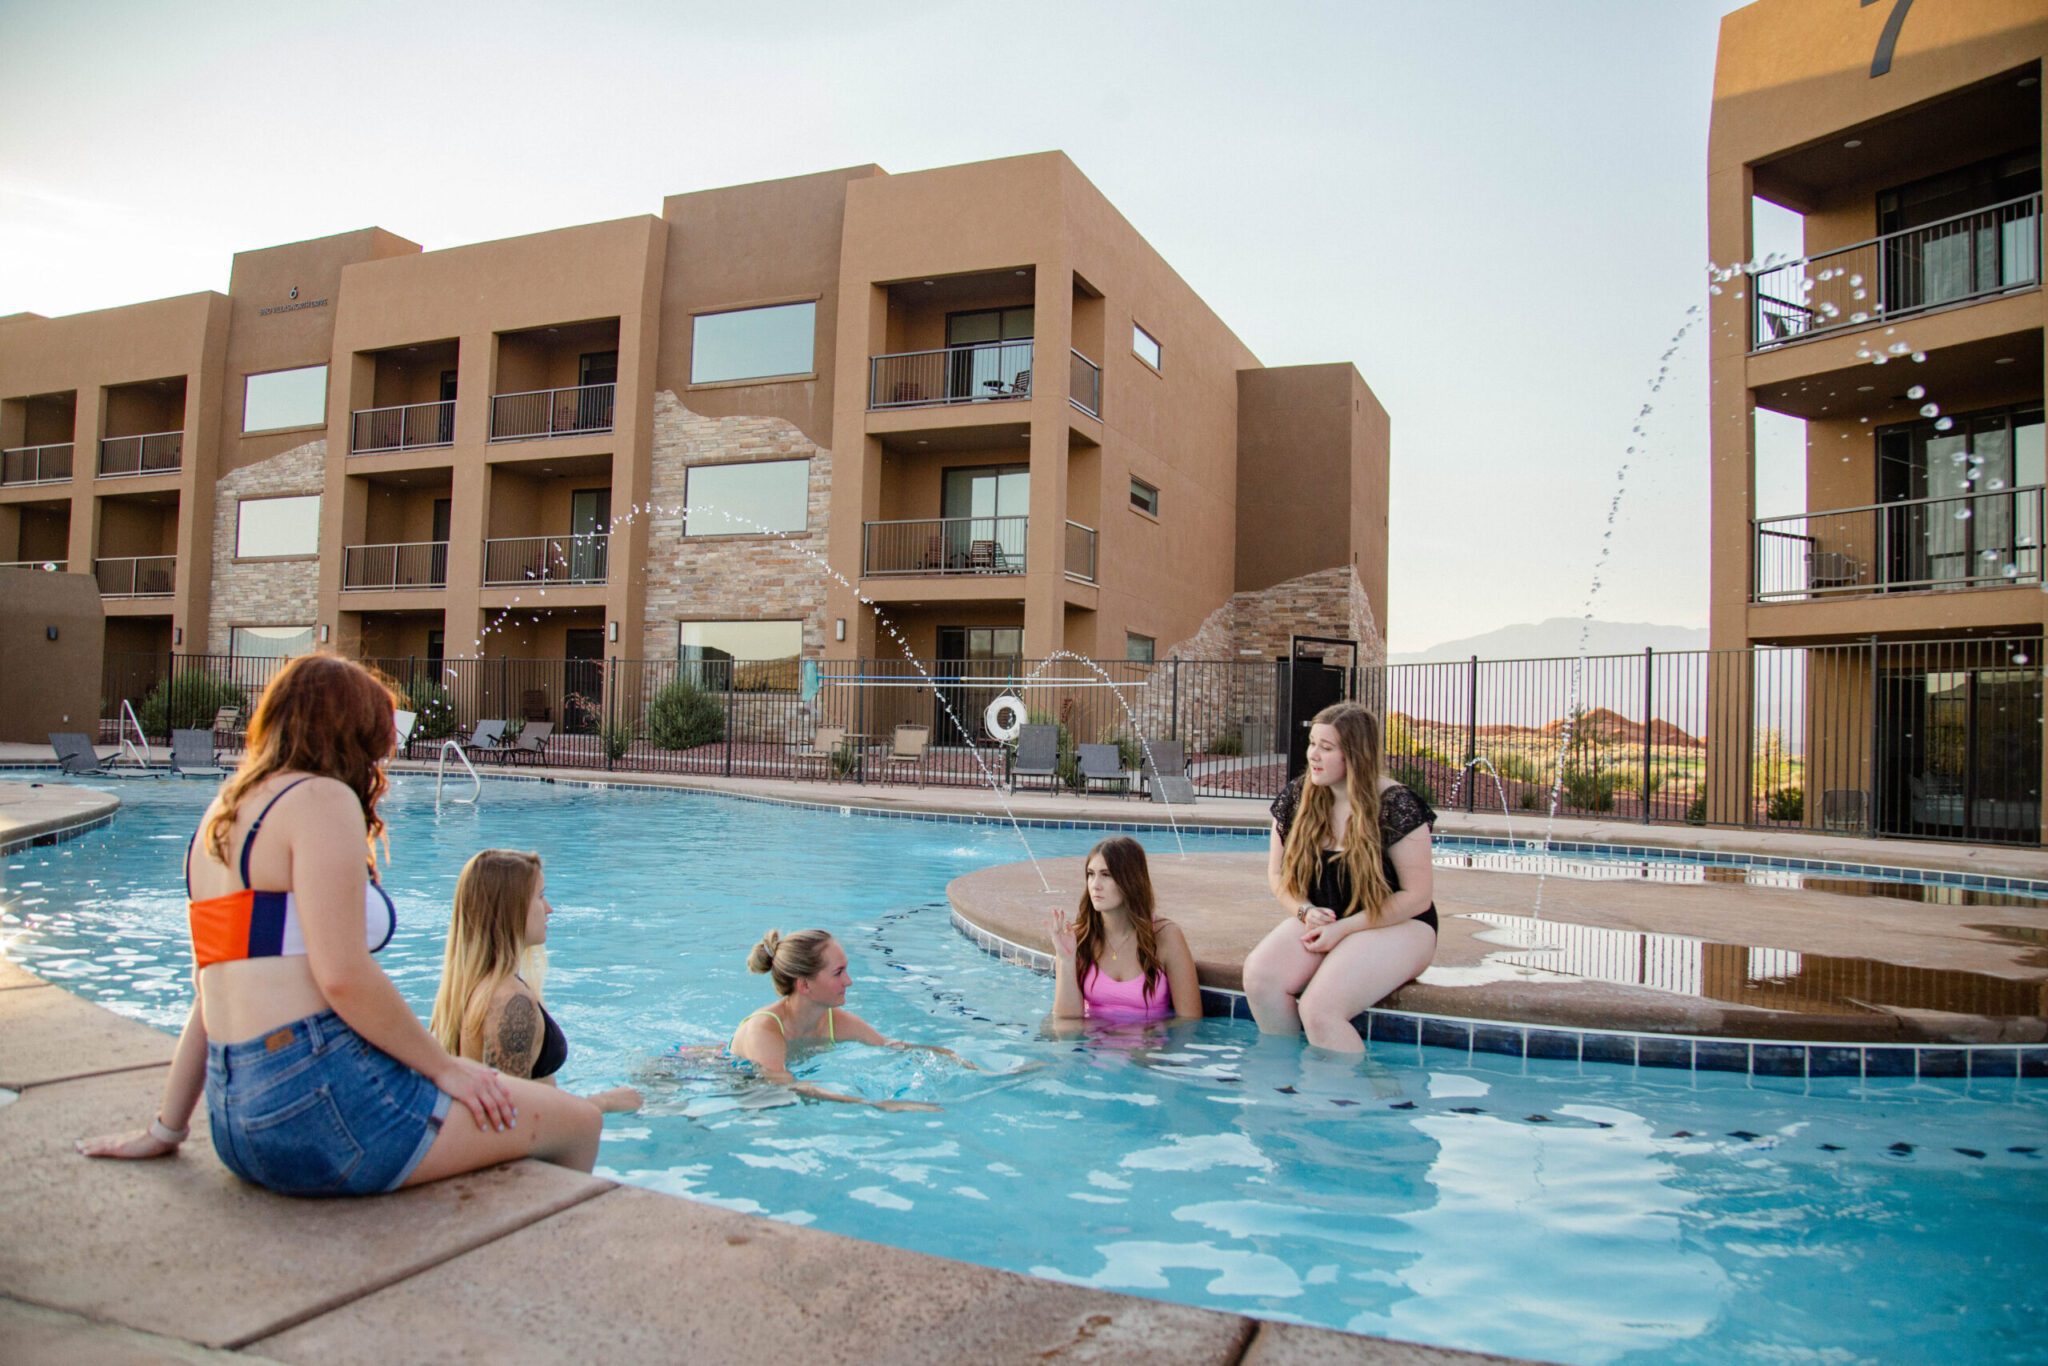 Find comfortable St. George, Utah lodging options for every traveler